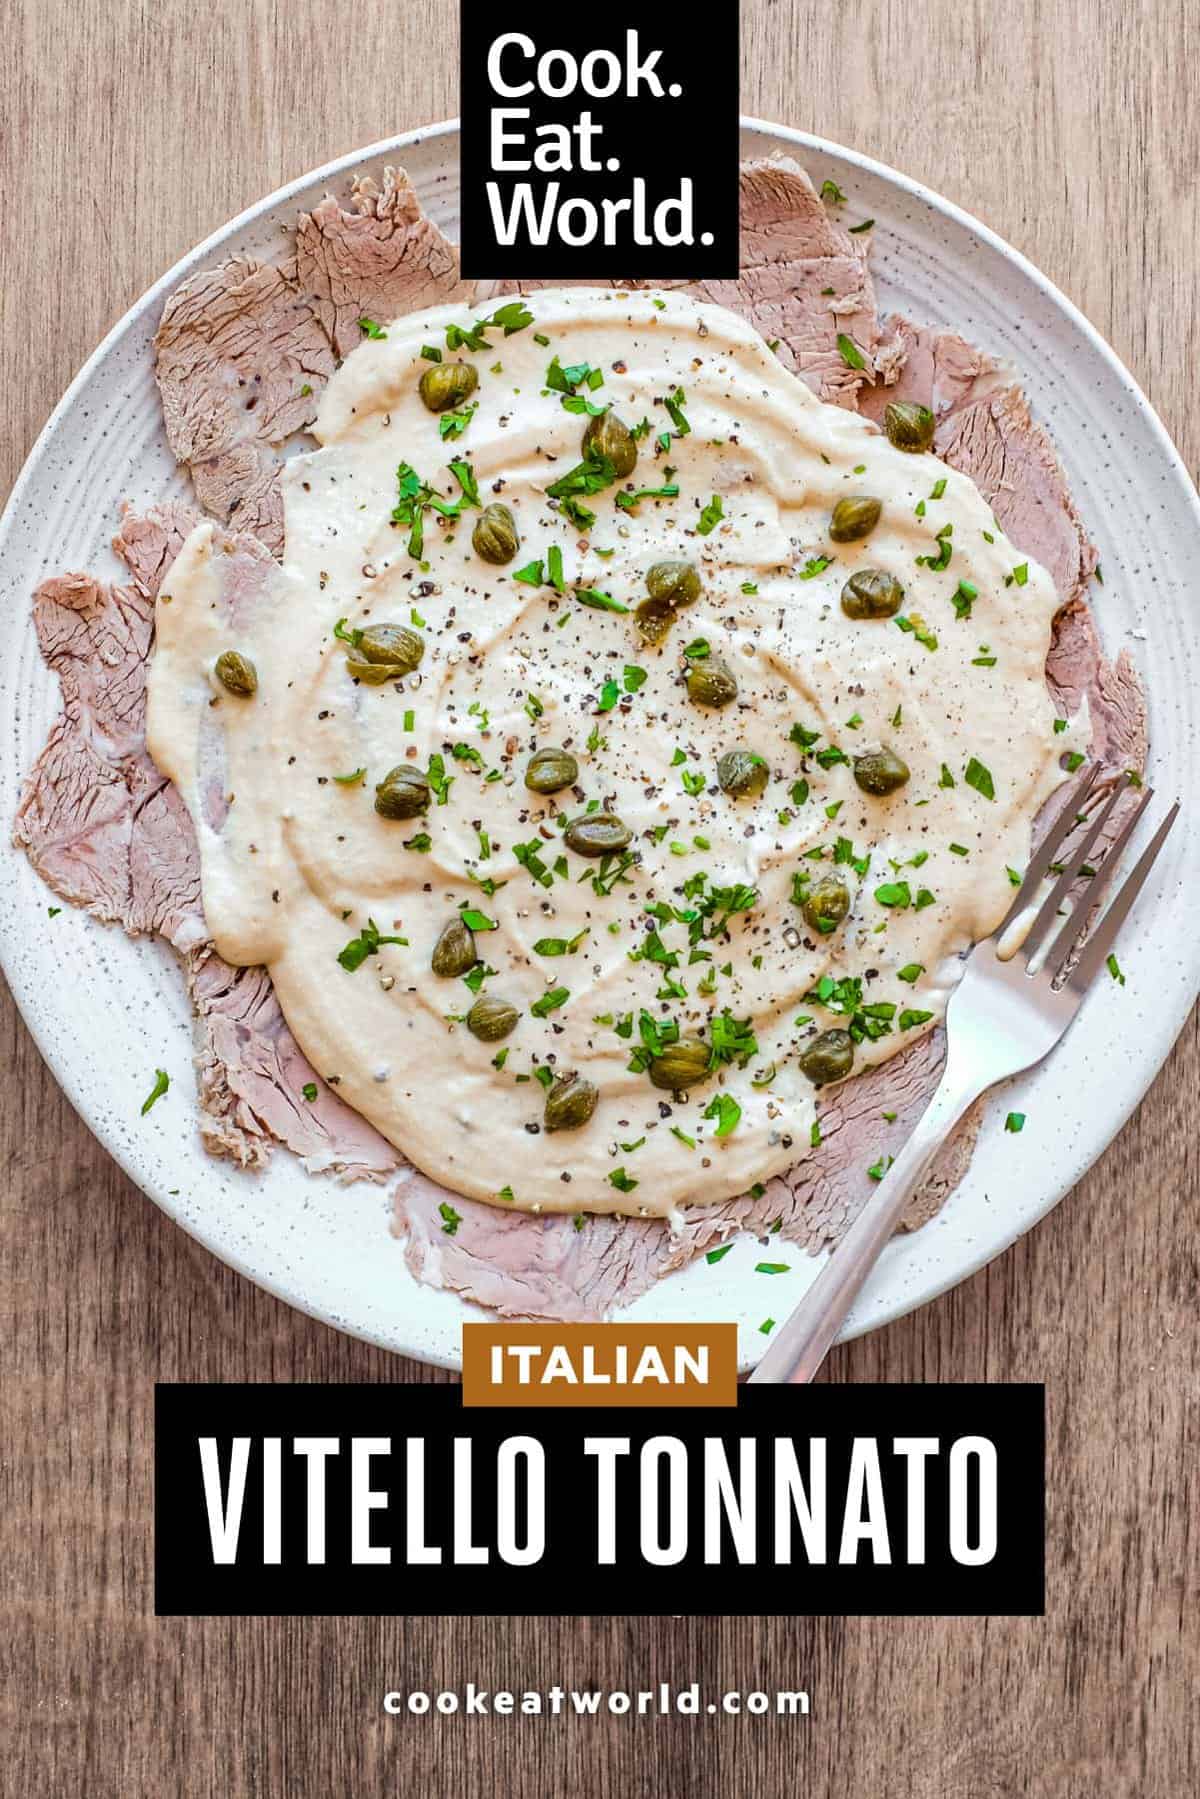 A large platter of Italian Vitello Tonnato (veal slices with a tuna mayonnaise) garnished with parsley and capers.